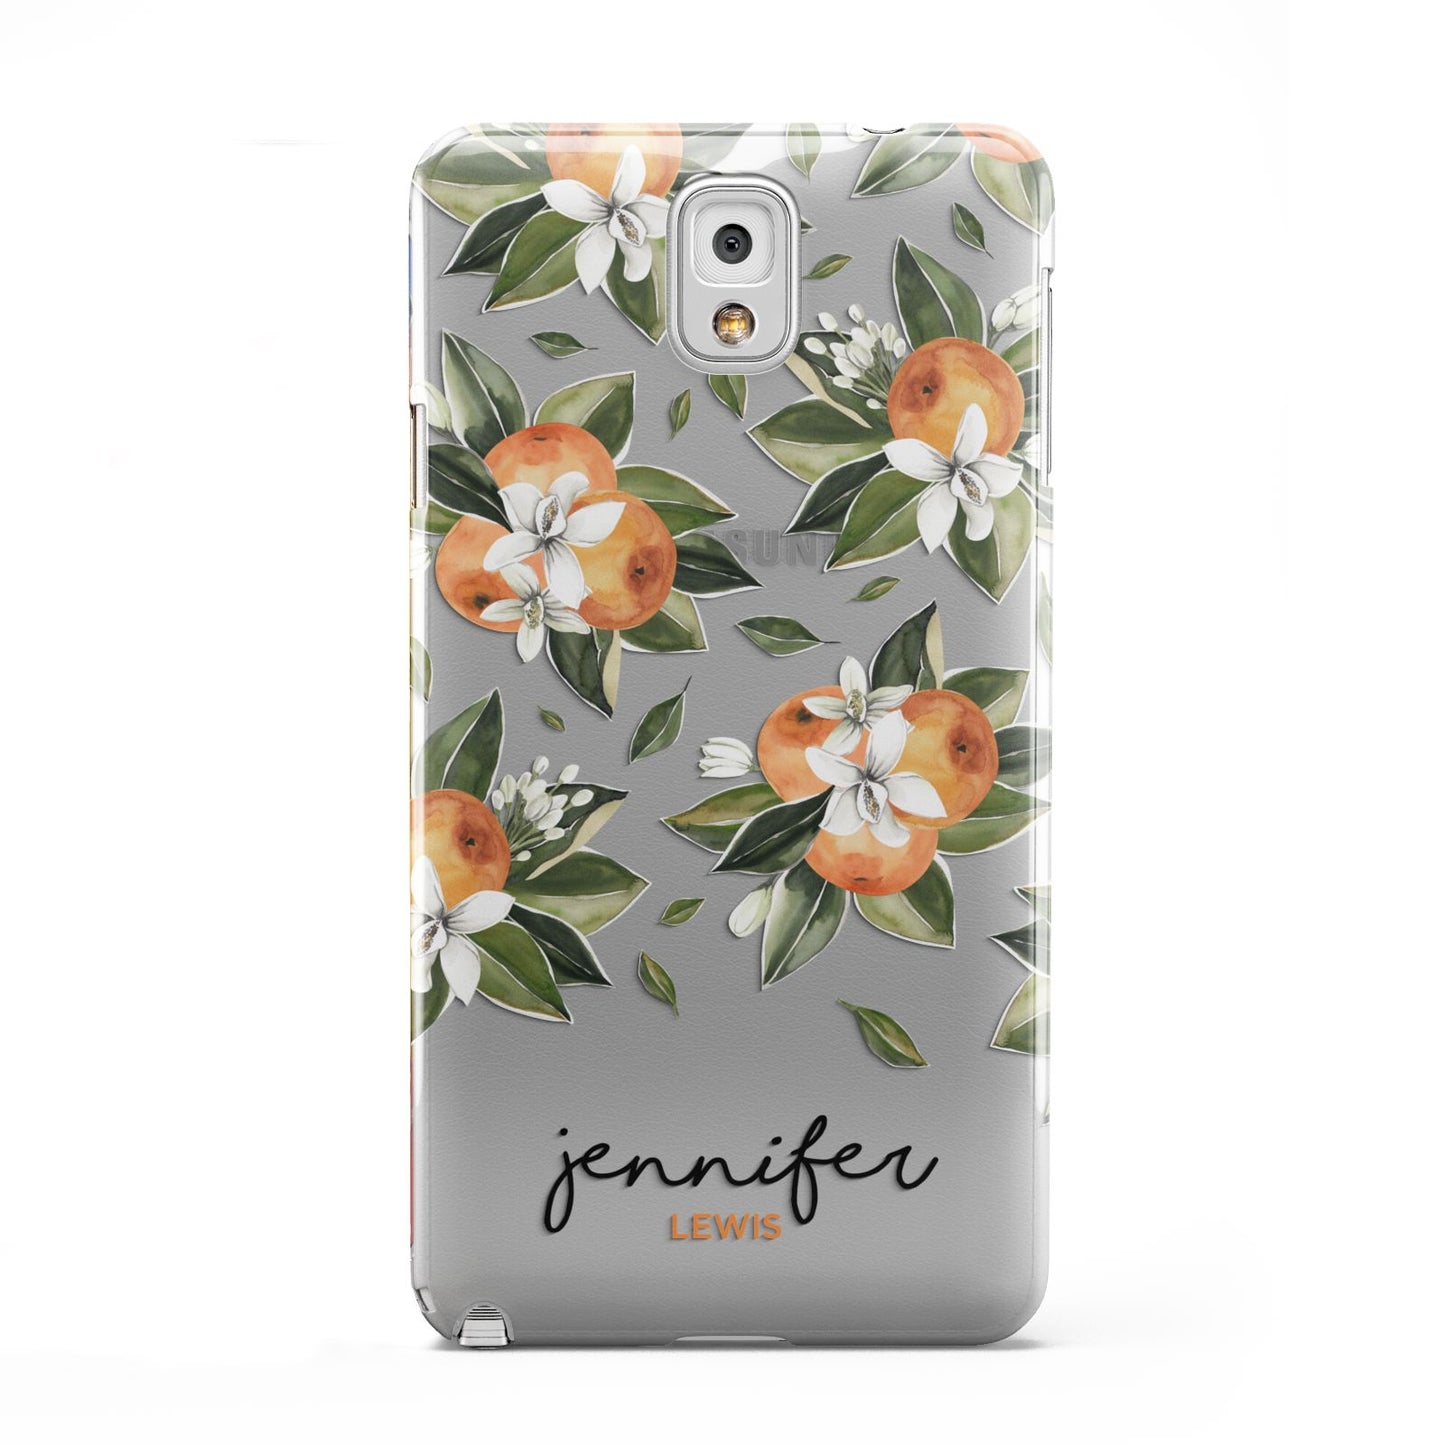 Personalised Bunch of Oranges Samsung Galaxy Note 3 Case